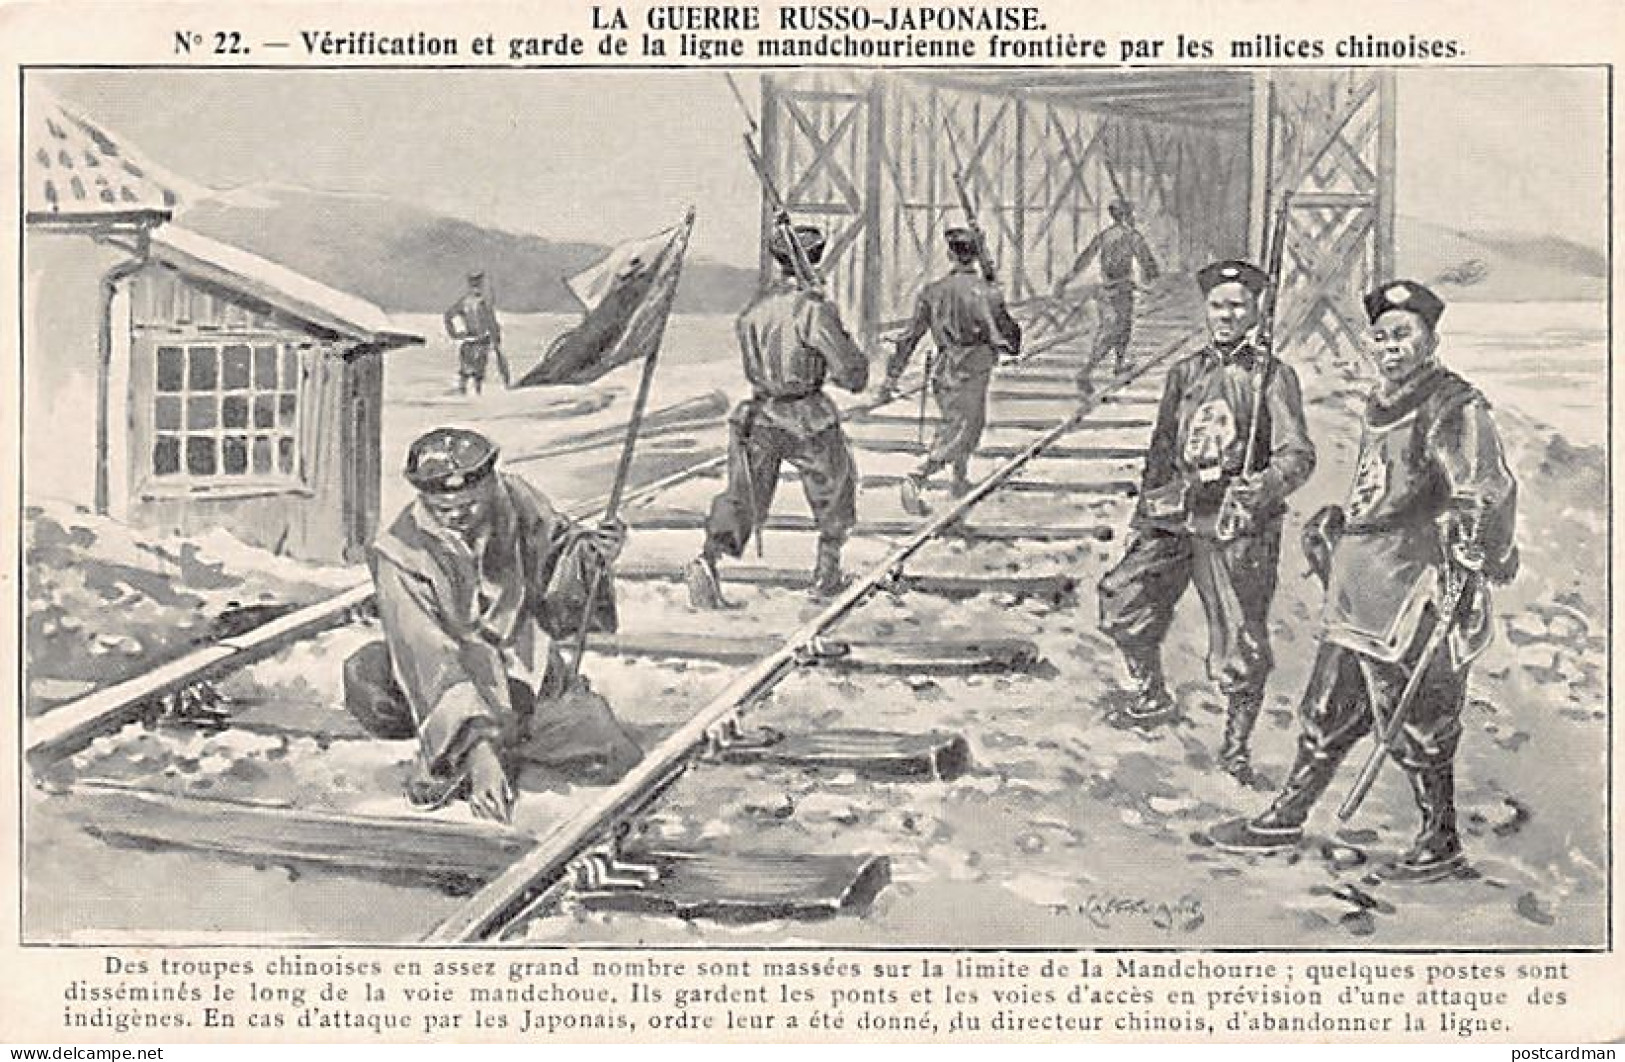 China - RUSSO JAPANESE WAR - Checking And Guarding The Railway Line On The Border Of Manchuria By Chinese Militiamen - China